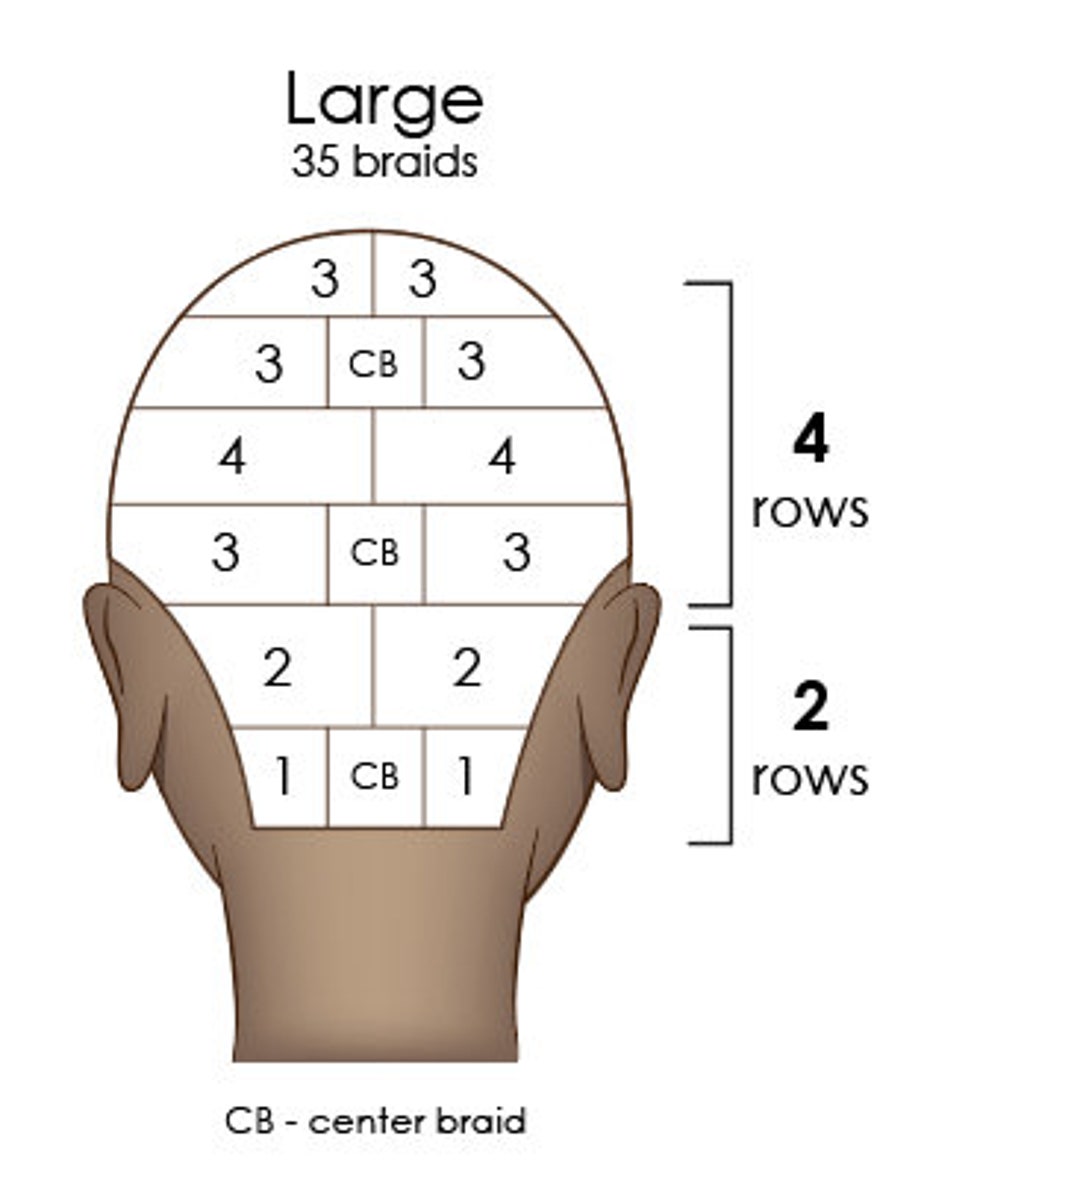 5 Different Braiding Charts, Braiders Guide, Consistent Braiding